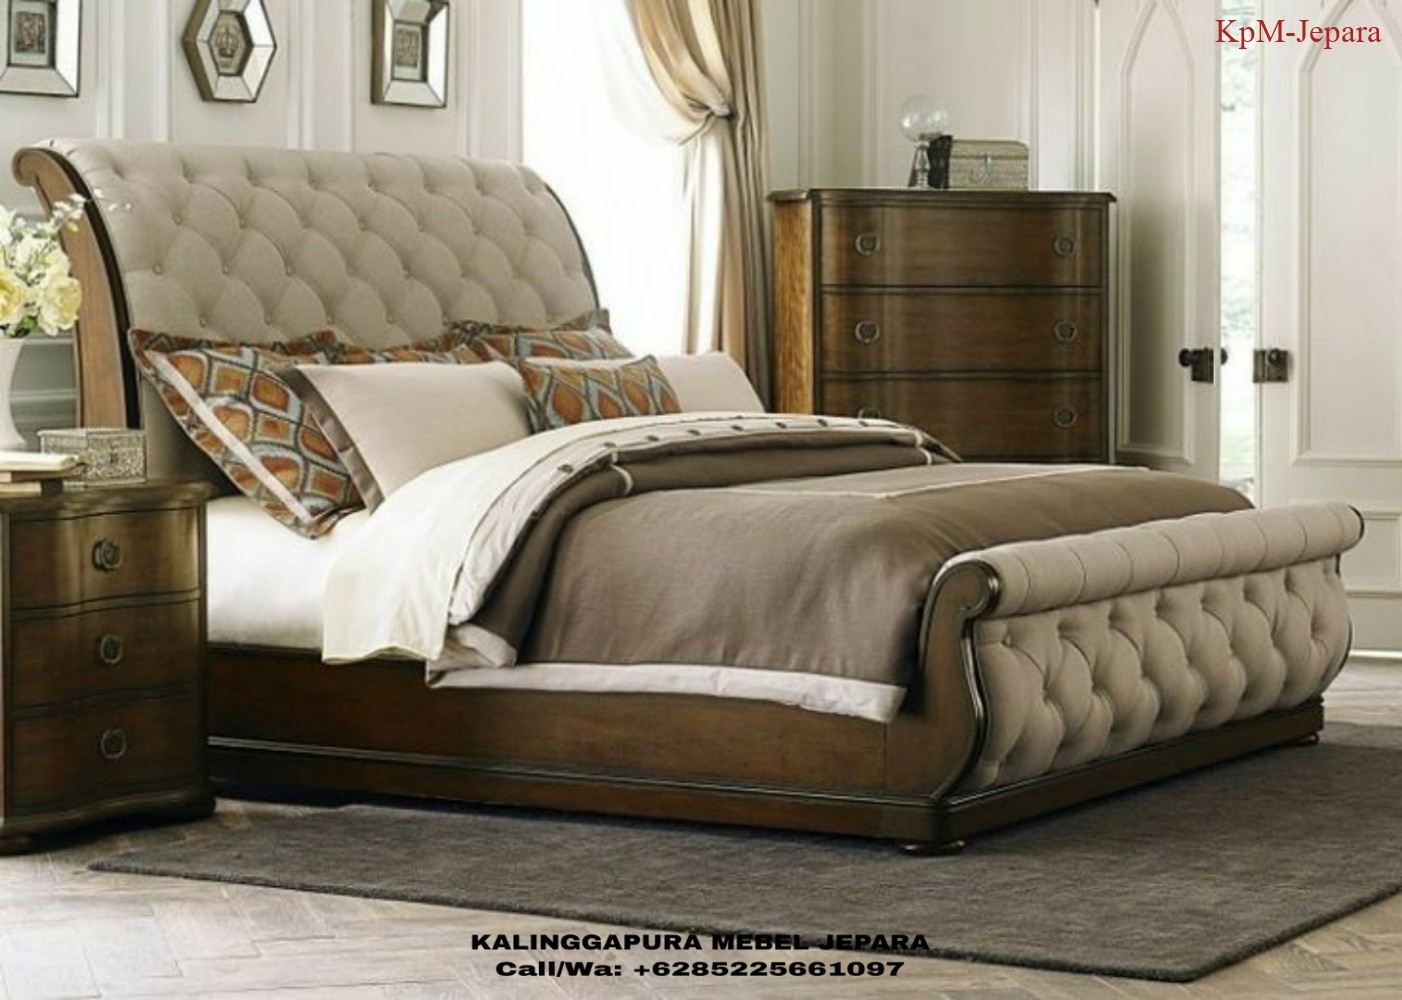 Adjustable Beds, Can You Attach A Headboard And Footboard To An Adjustable Bed